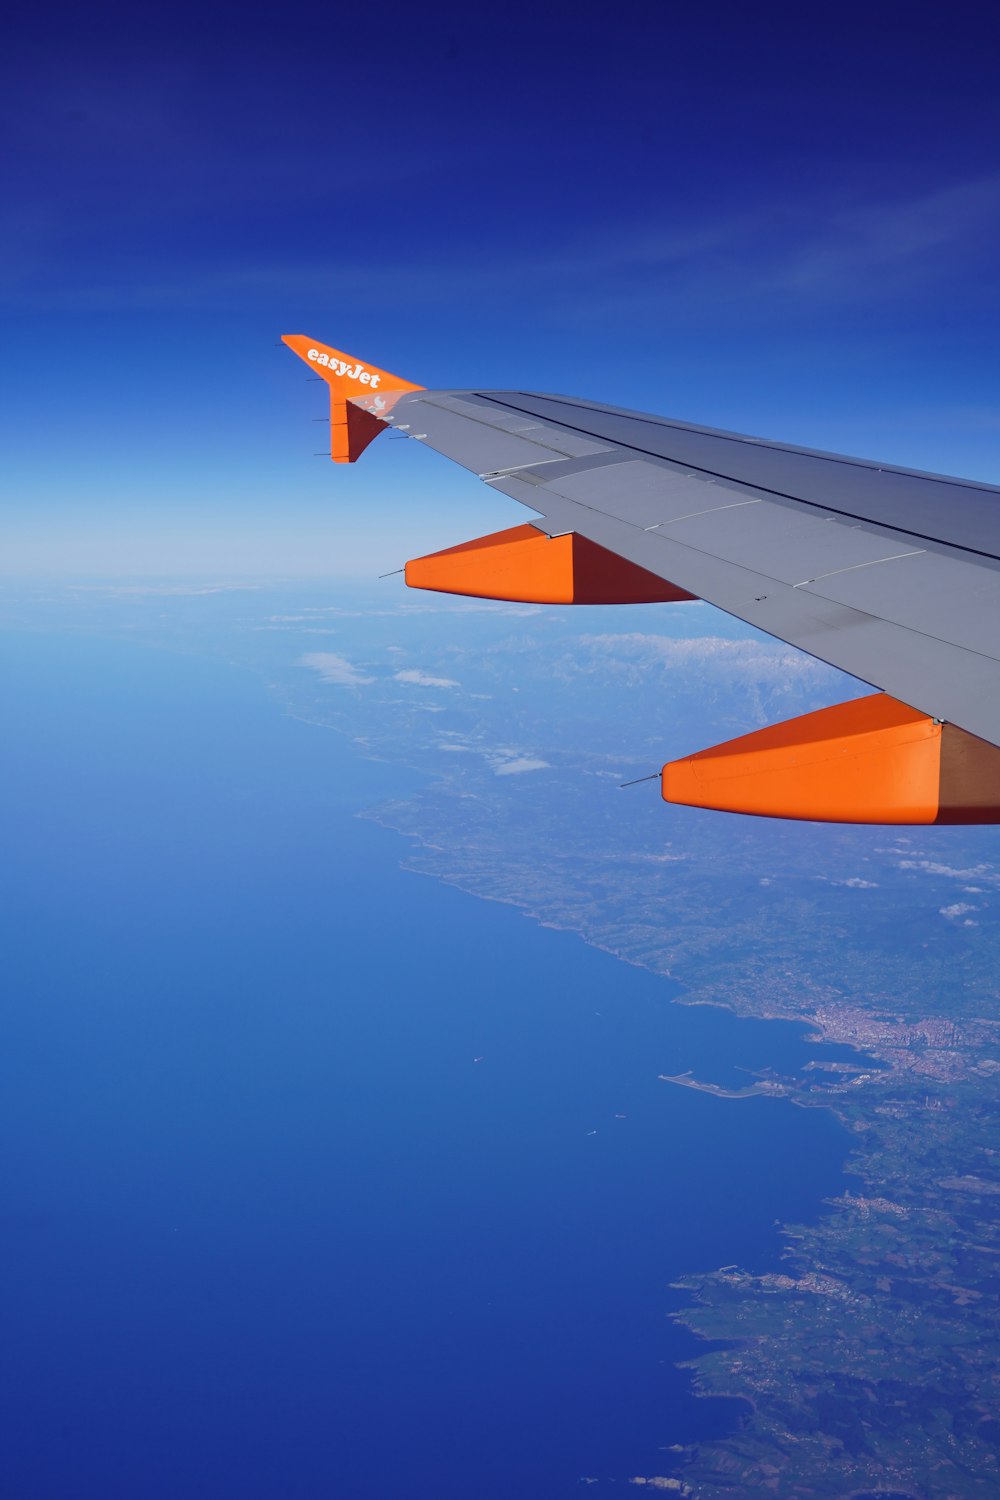 the wing of an airplane flying over the ocean